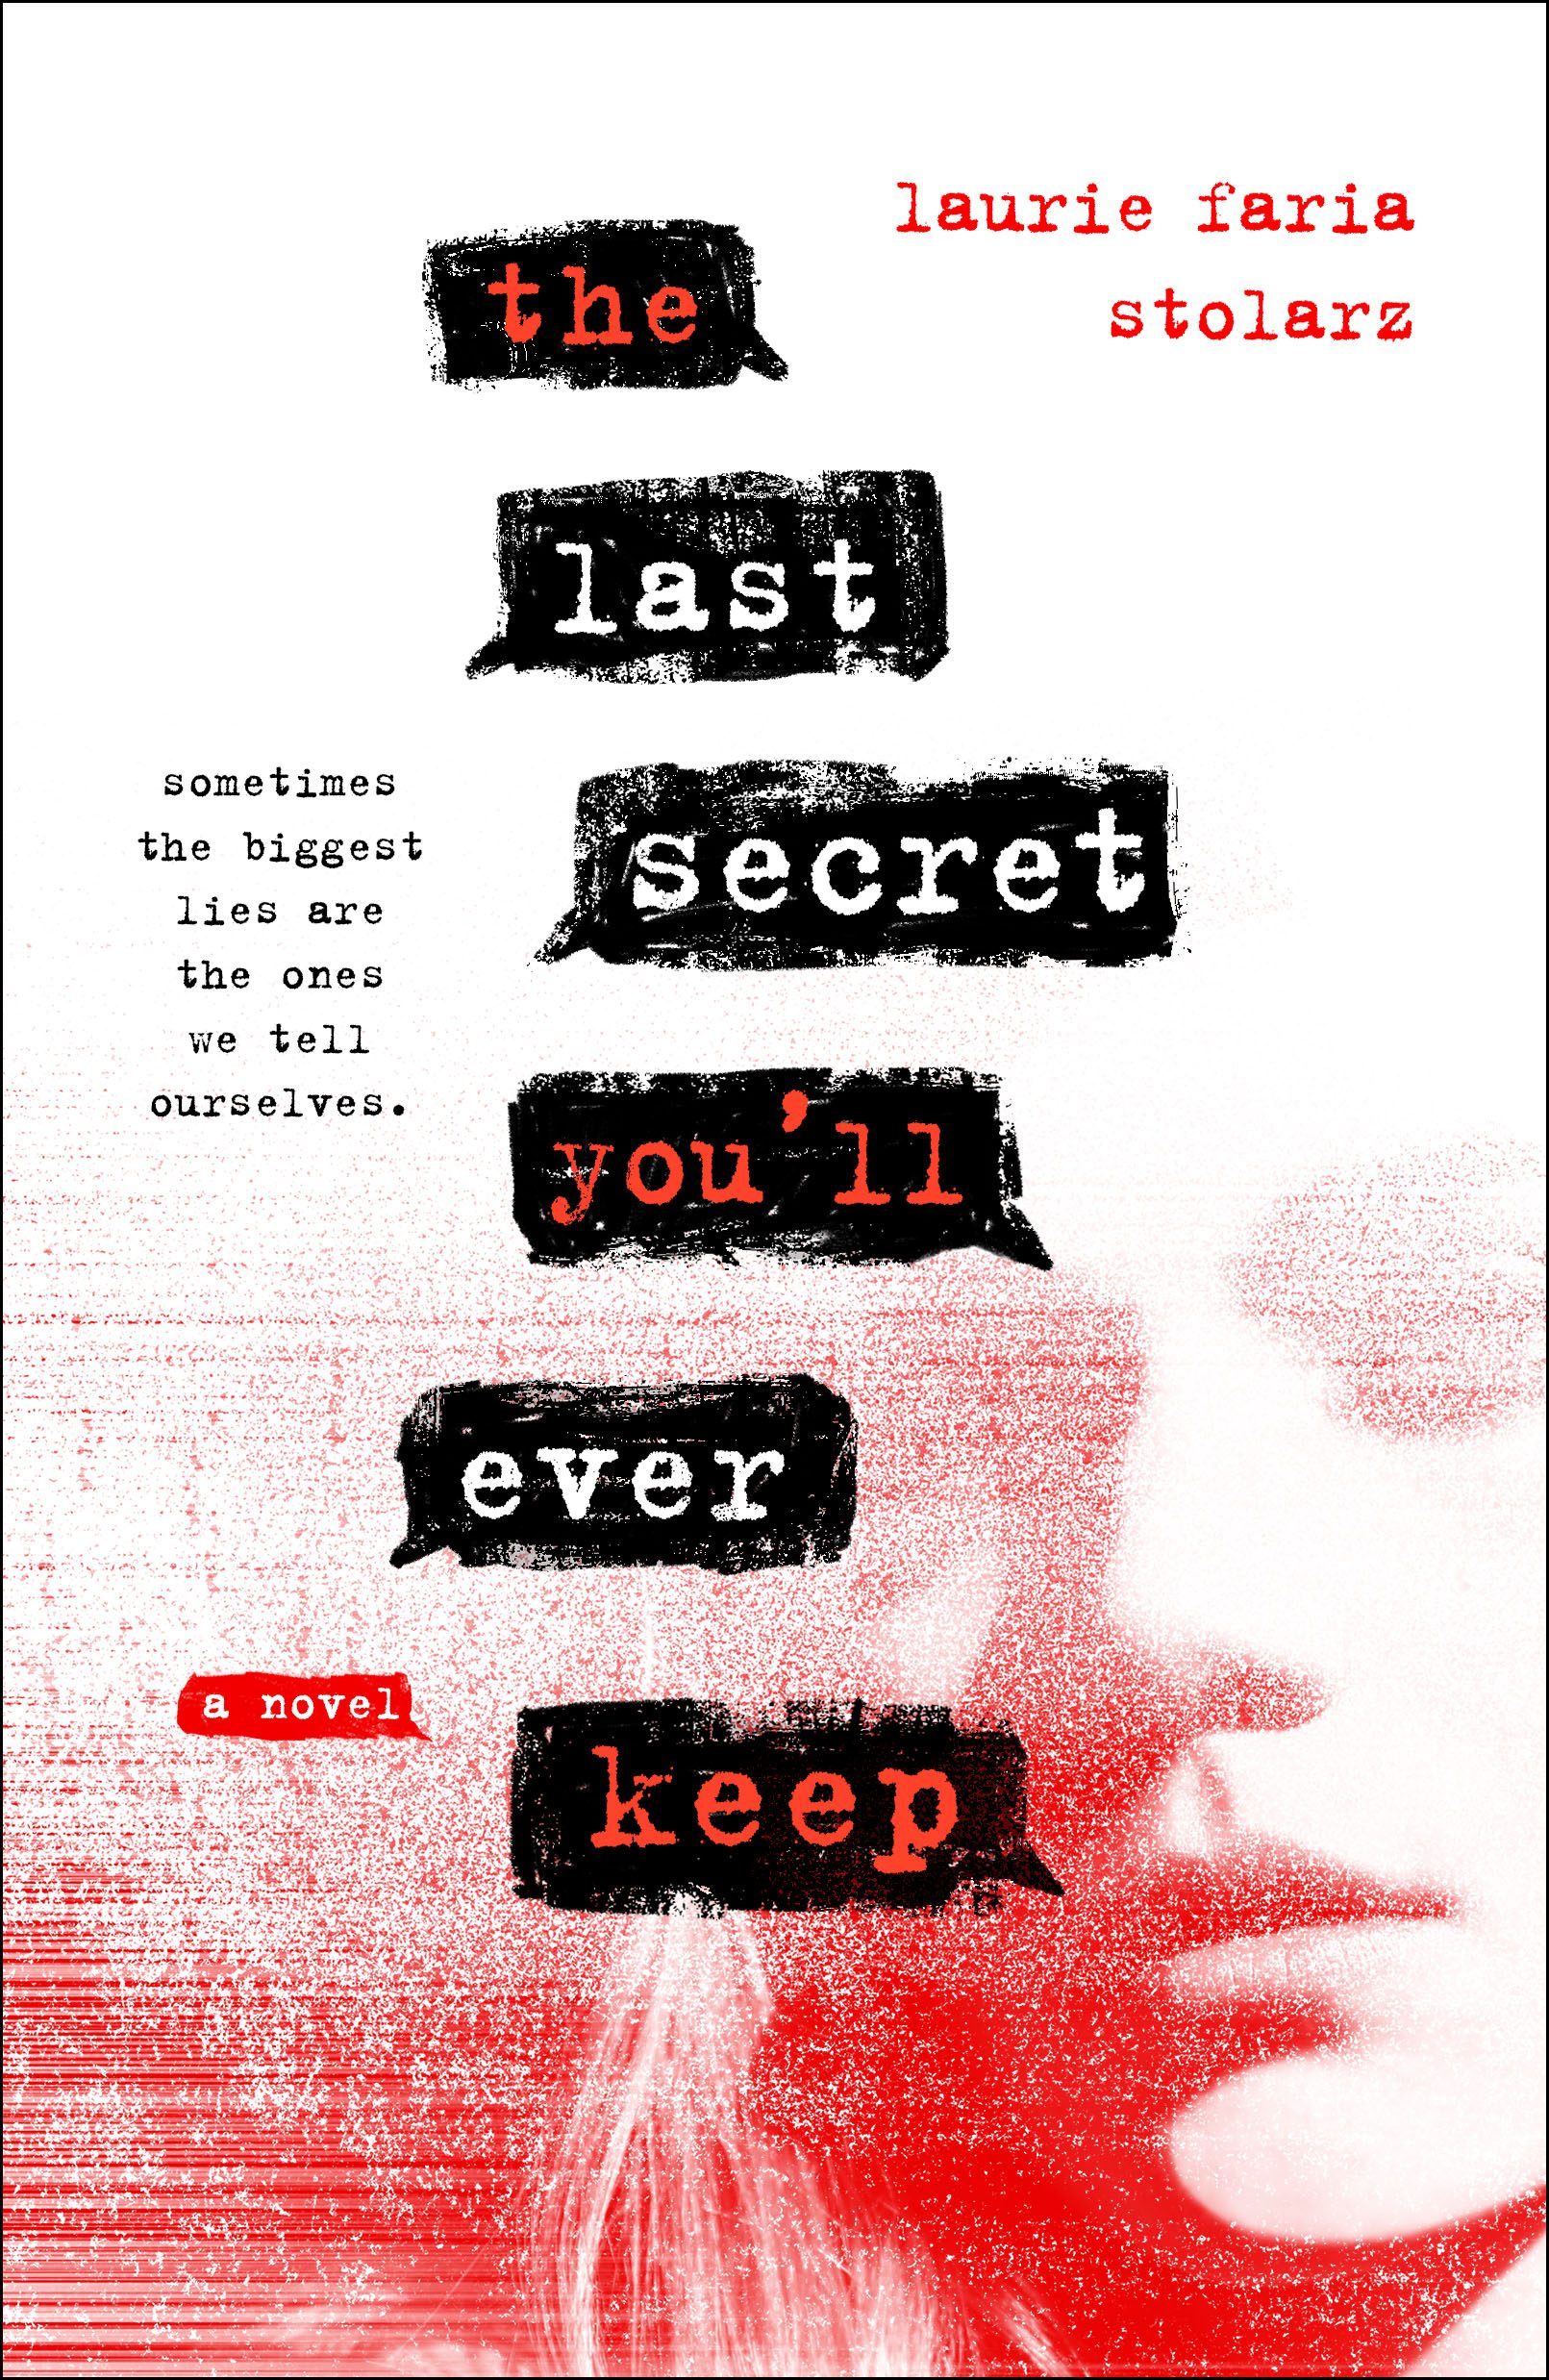 When Will The Last Secret You’ll Ever Keep Come Out? 2021 Laurie Faria Stolarz New Releases